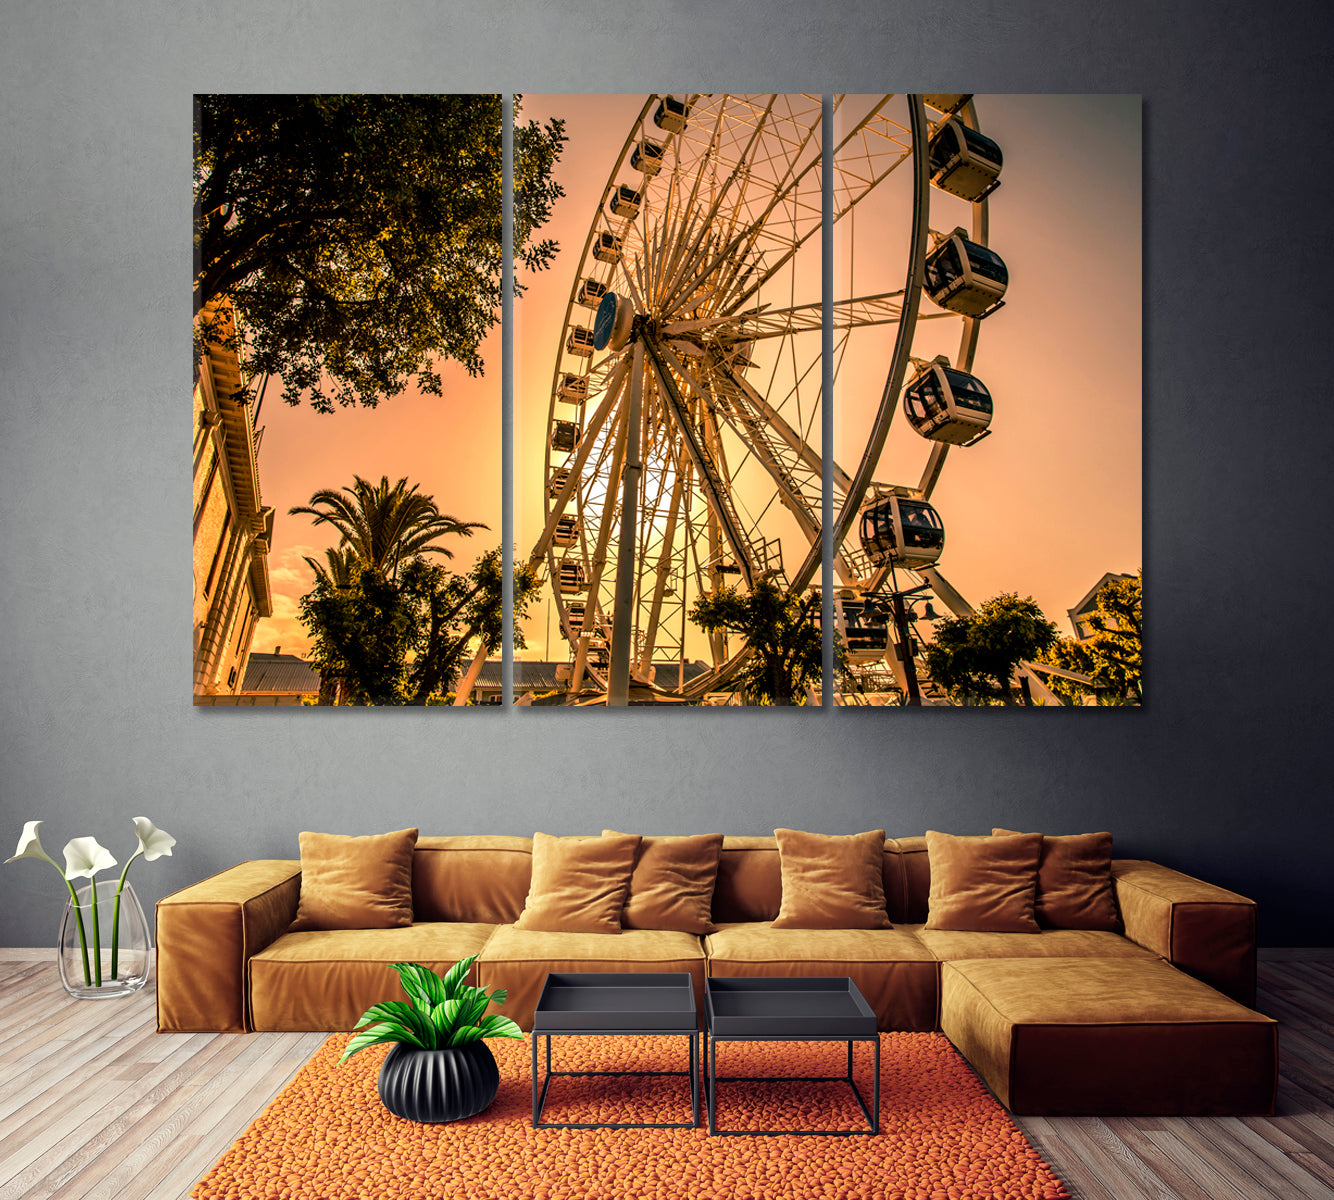 Cape Wheel in Cape Town South Africa Canvas Print ArtLexy 3 Panels 36"x24" inches 